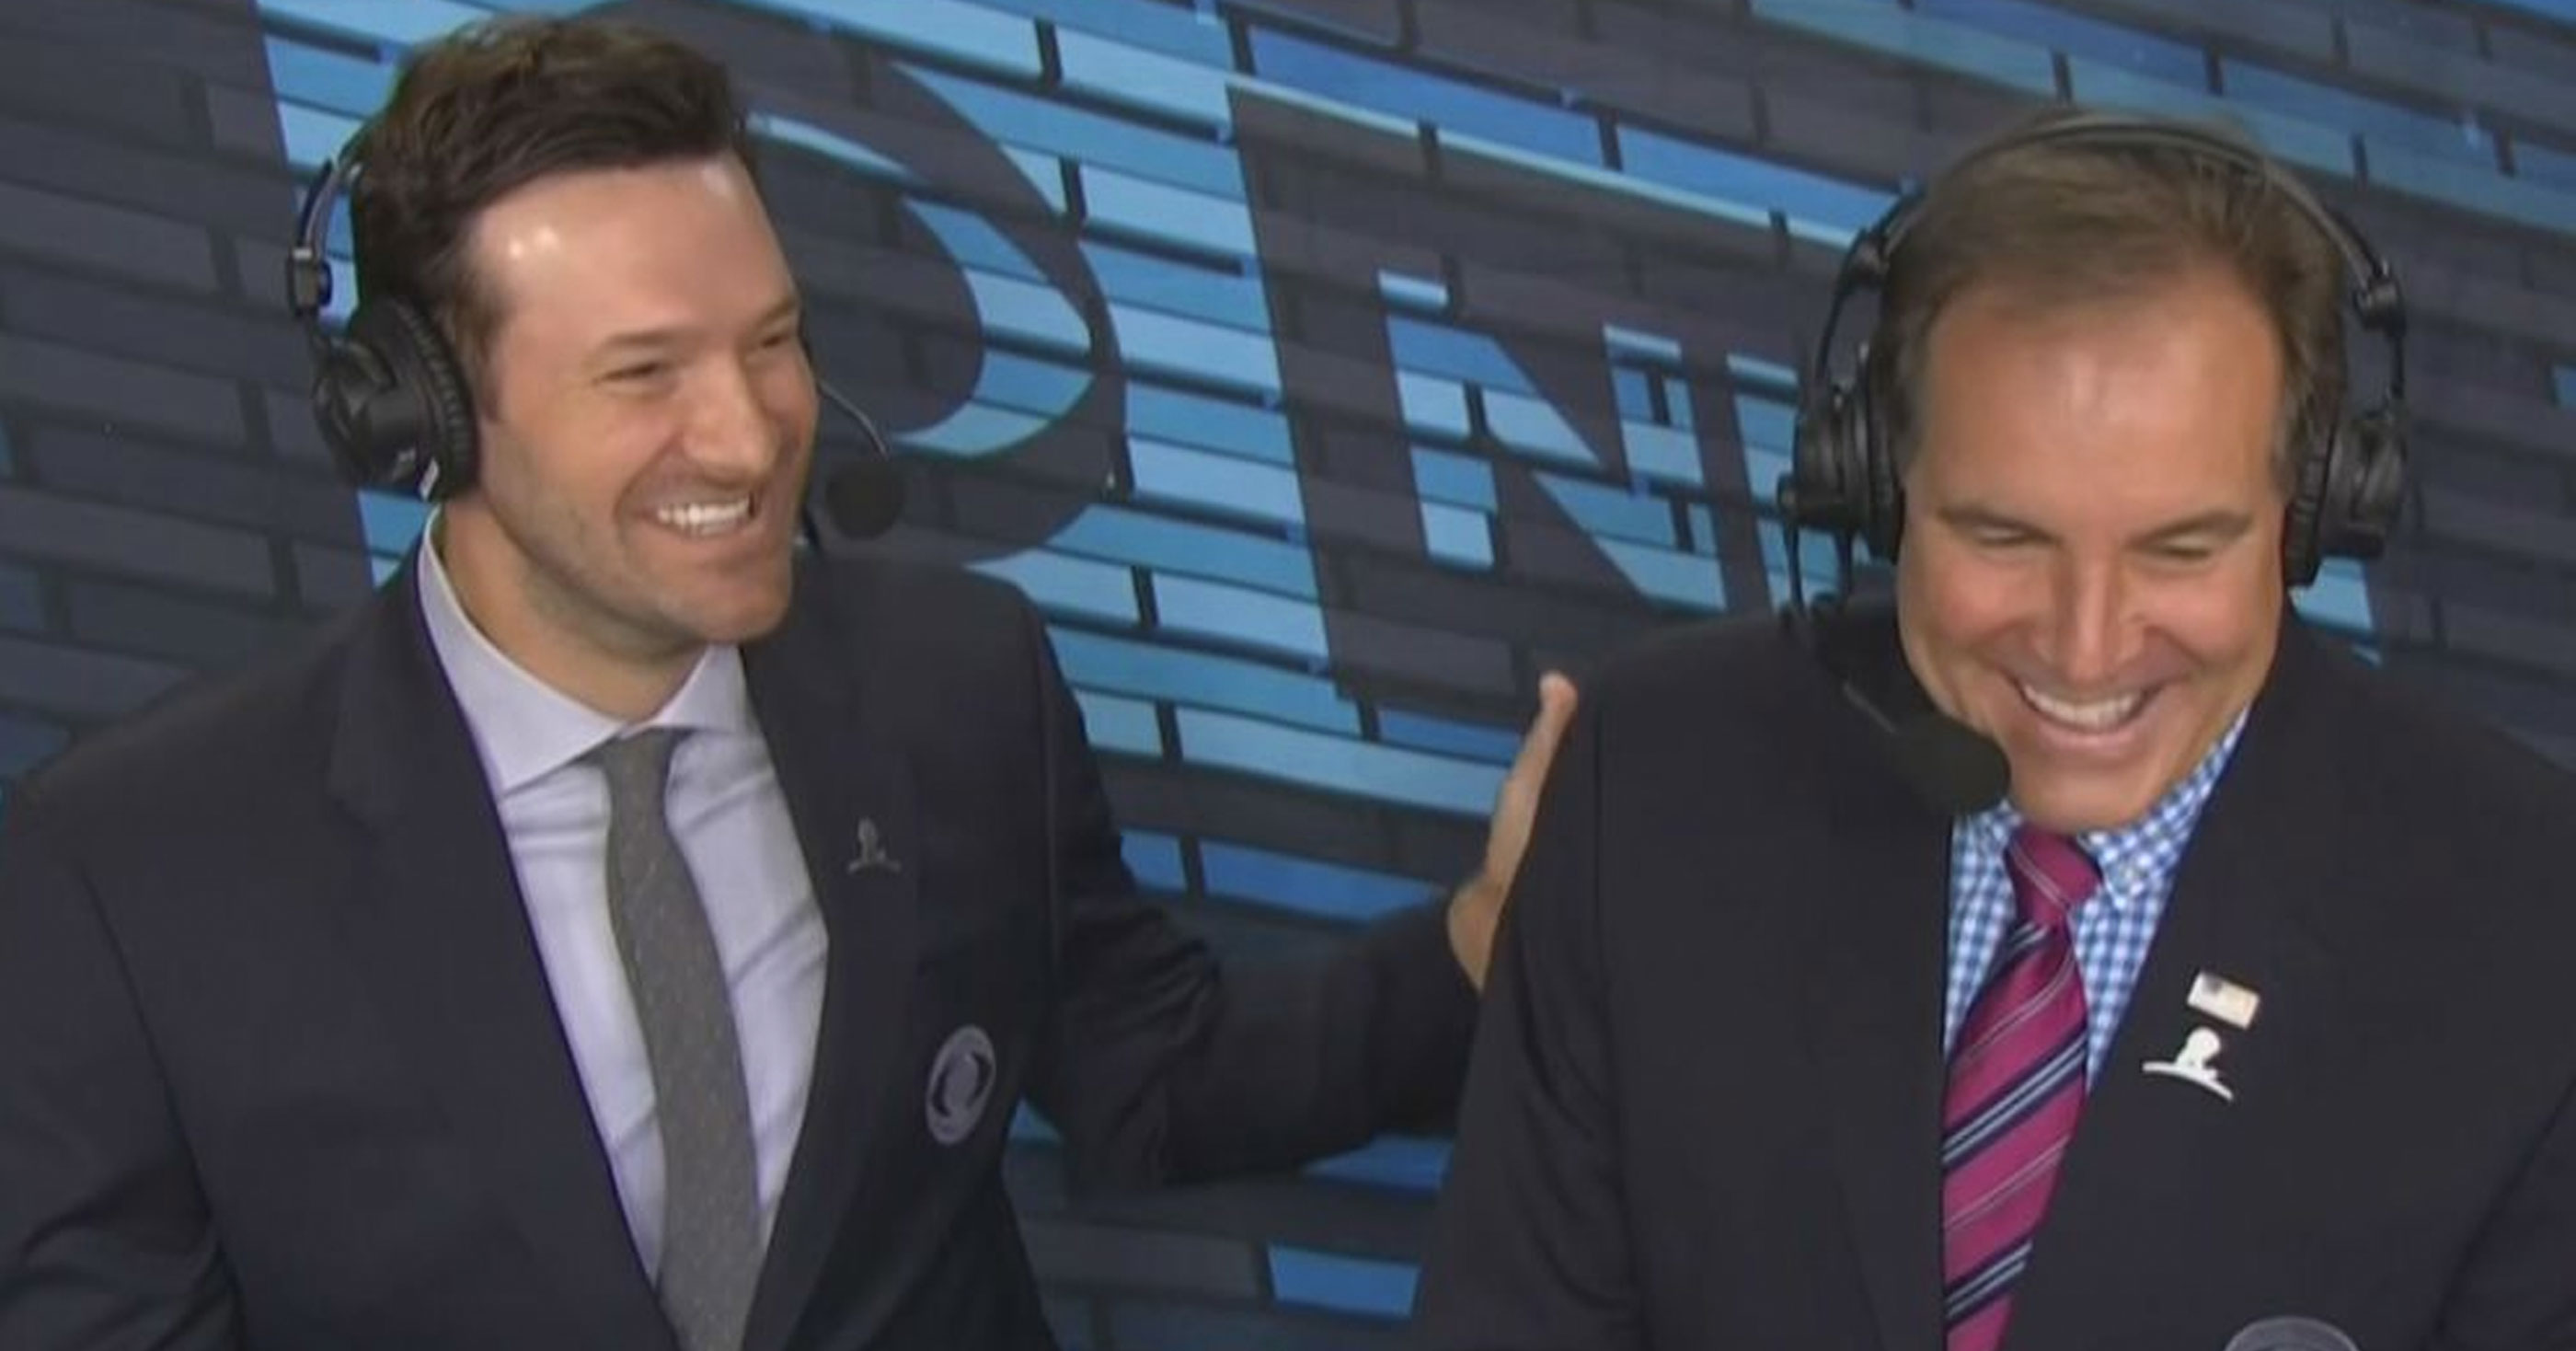 VIDEO: Jim Nantz Trolled Tony Romo On His Back Issues Live On Air